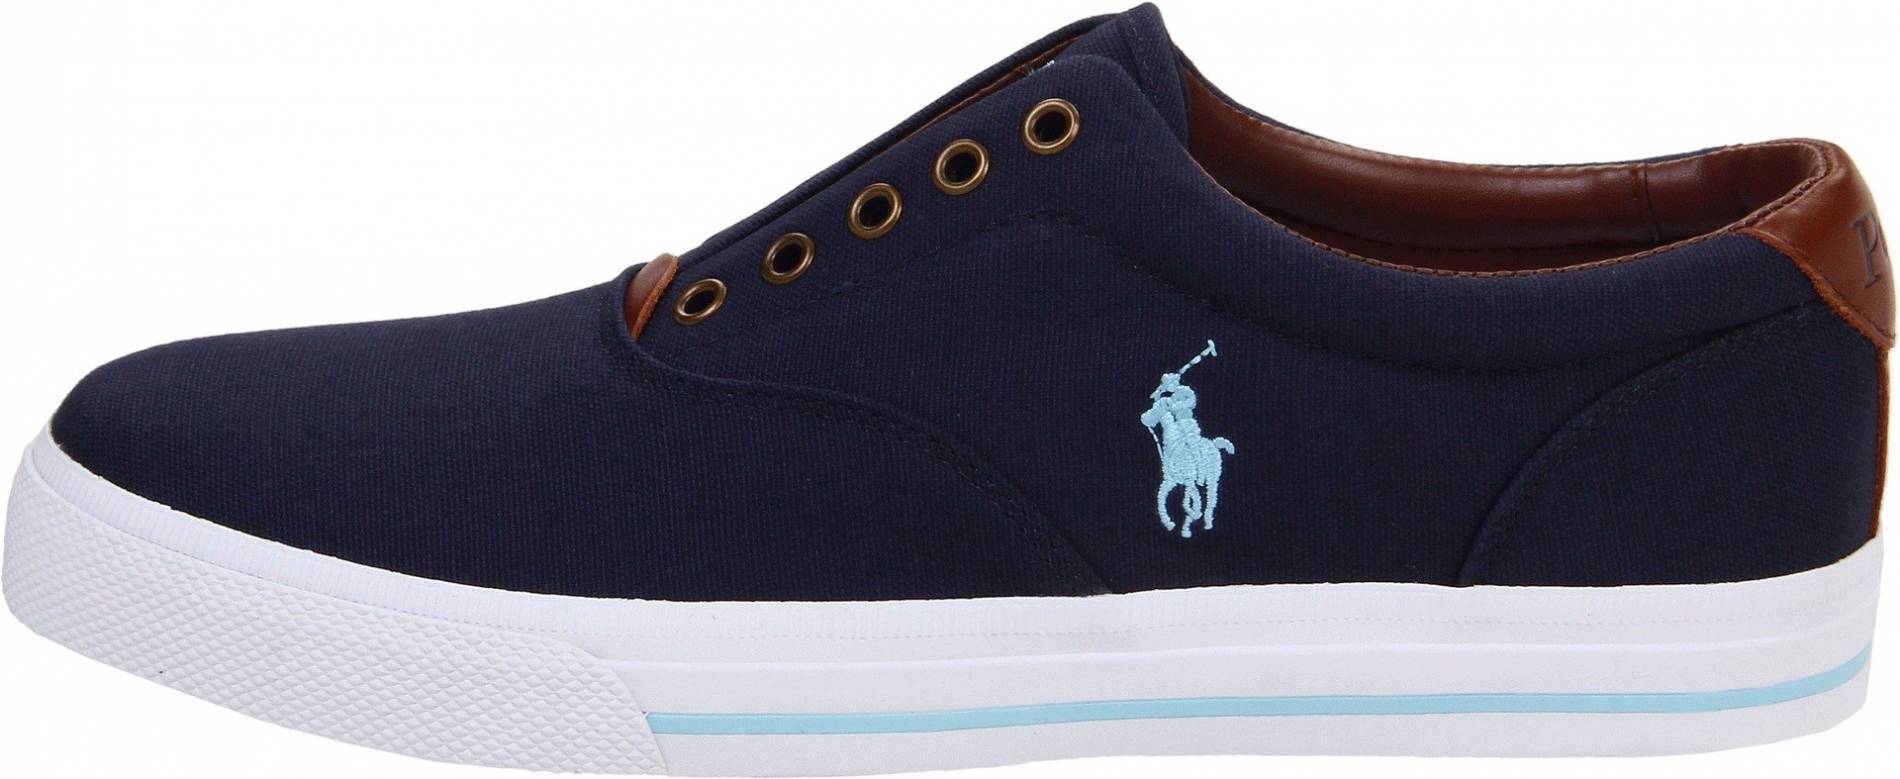 polo shoes Off 68% - www.gmcanantnag.net